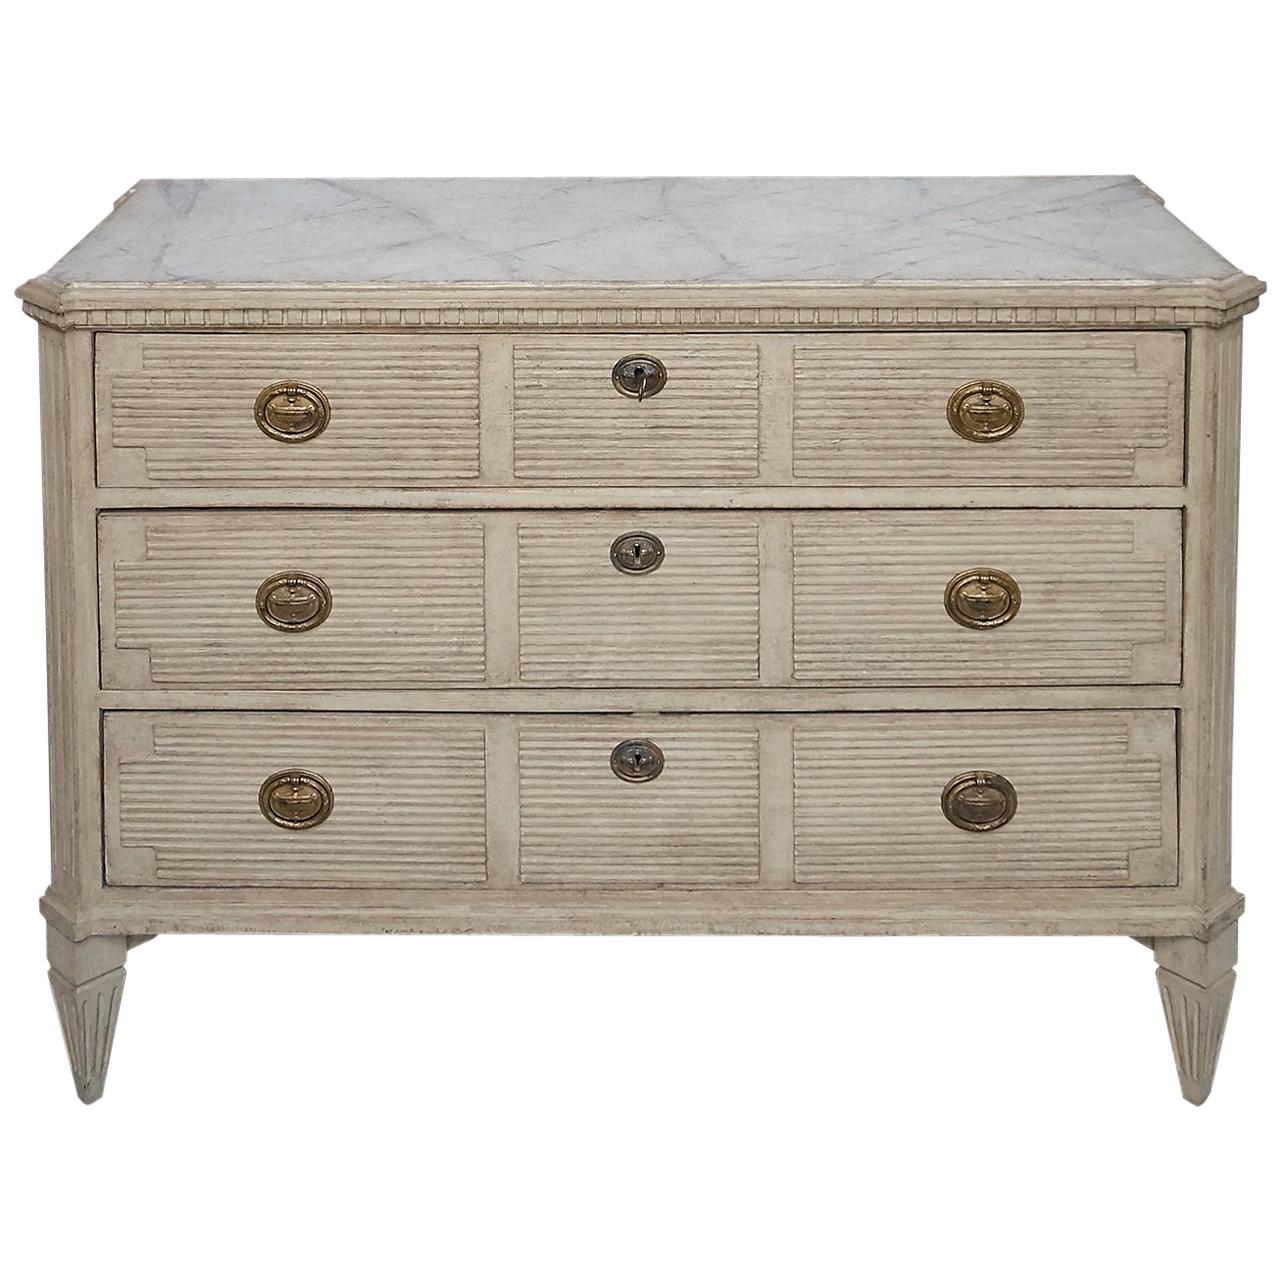 Swedish Chest of Drawers with Neoclassical Details